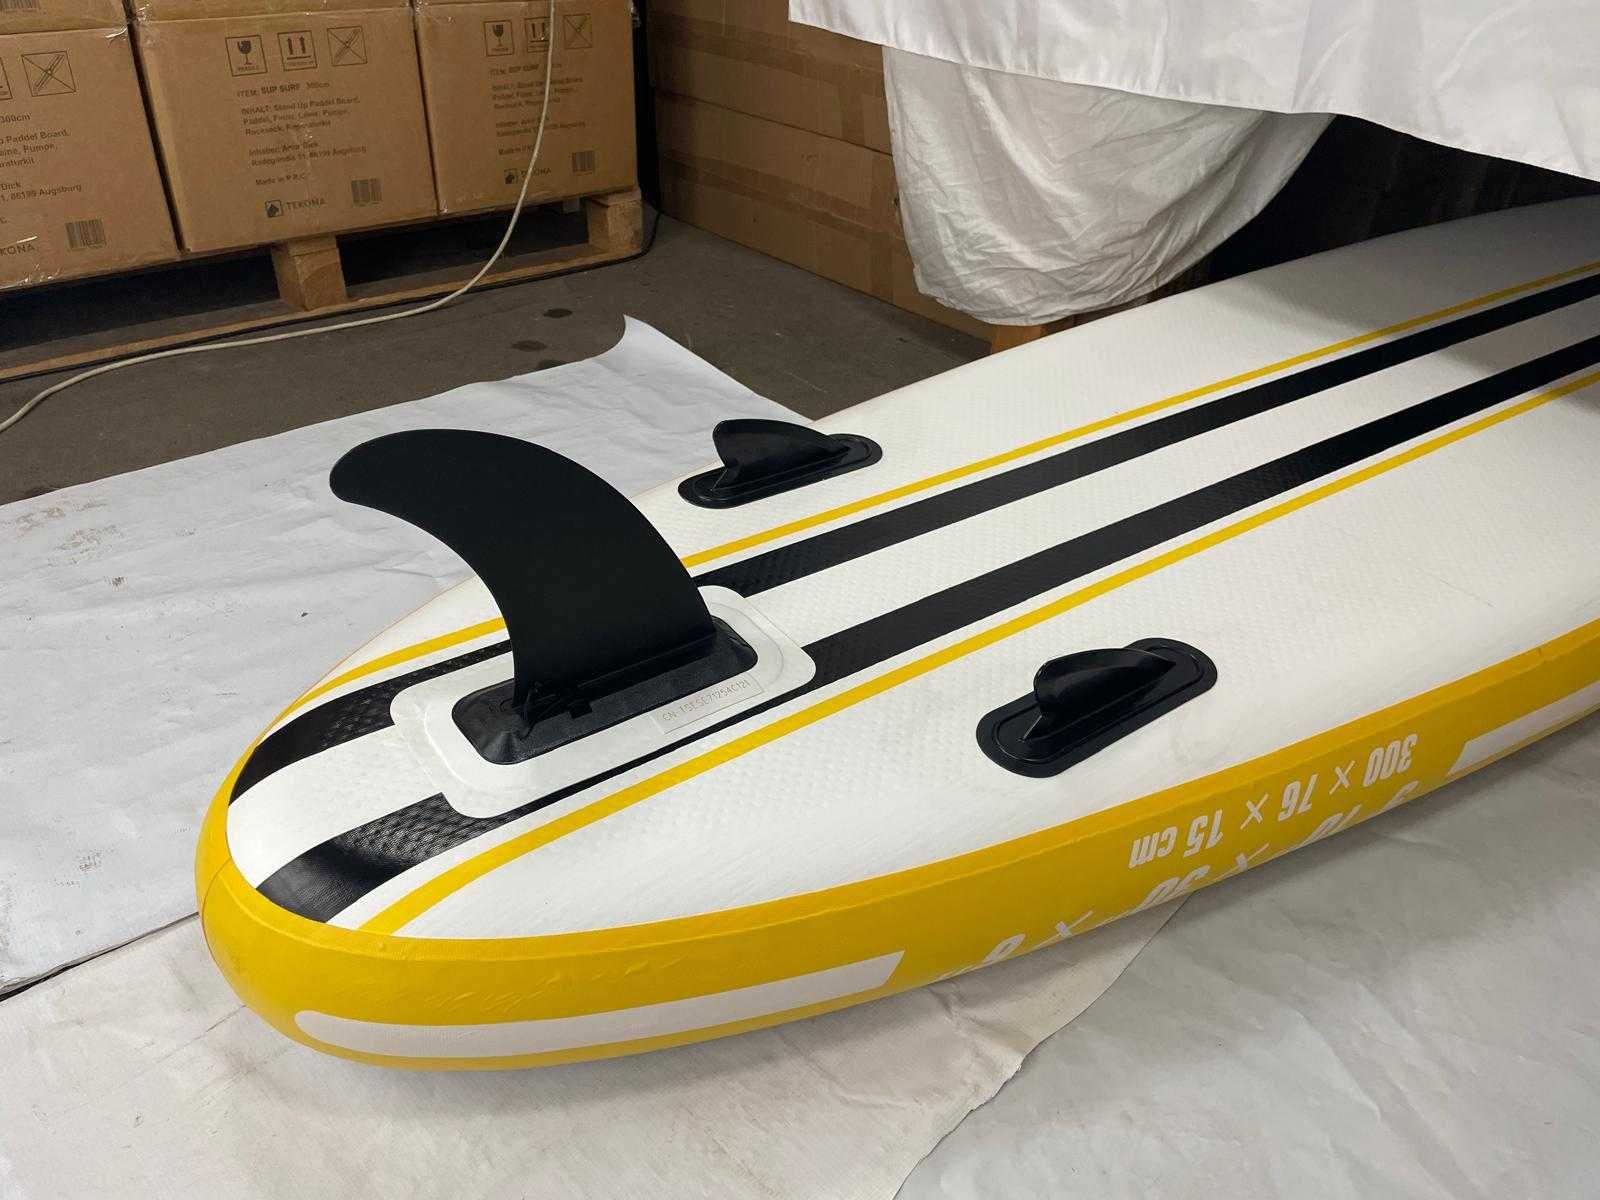 SUP дошка 300 см САП доска НОВАЯ борд TEKONA Stand Up Paddle Board Set